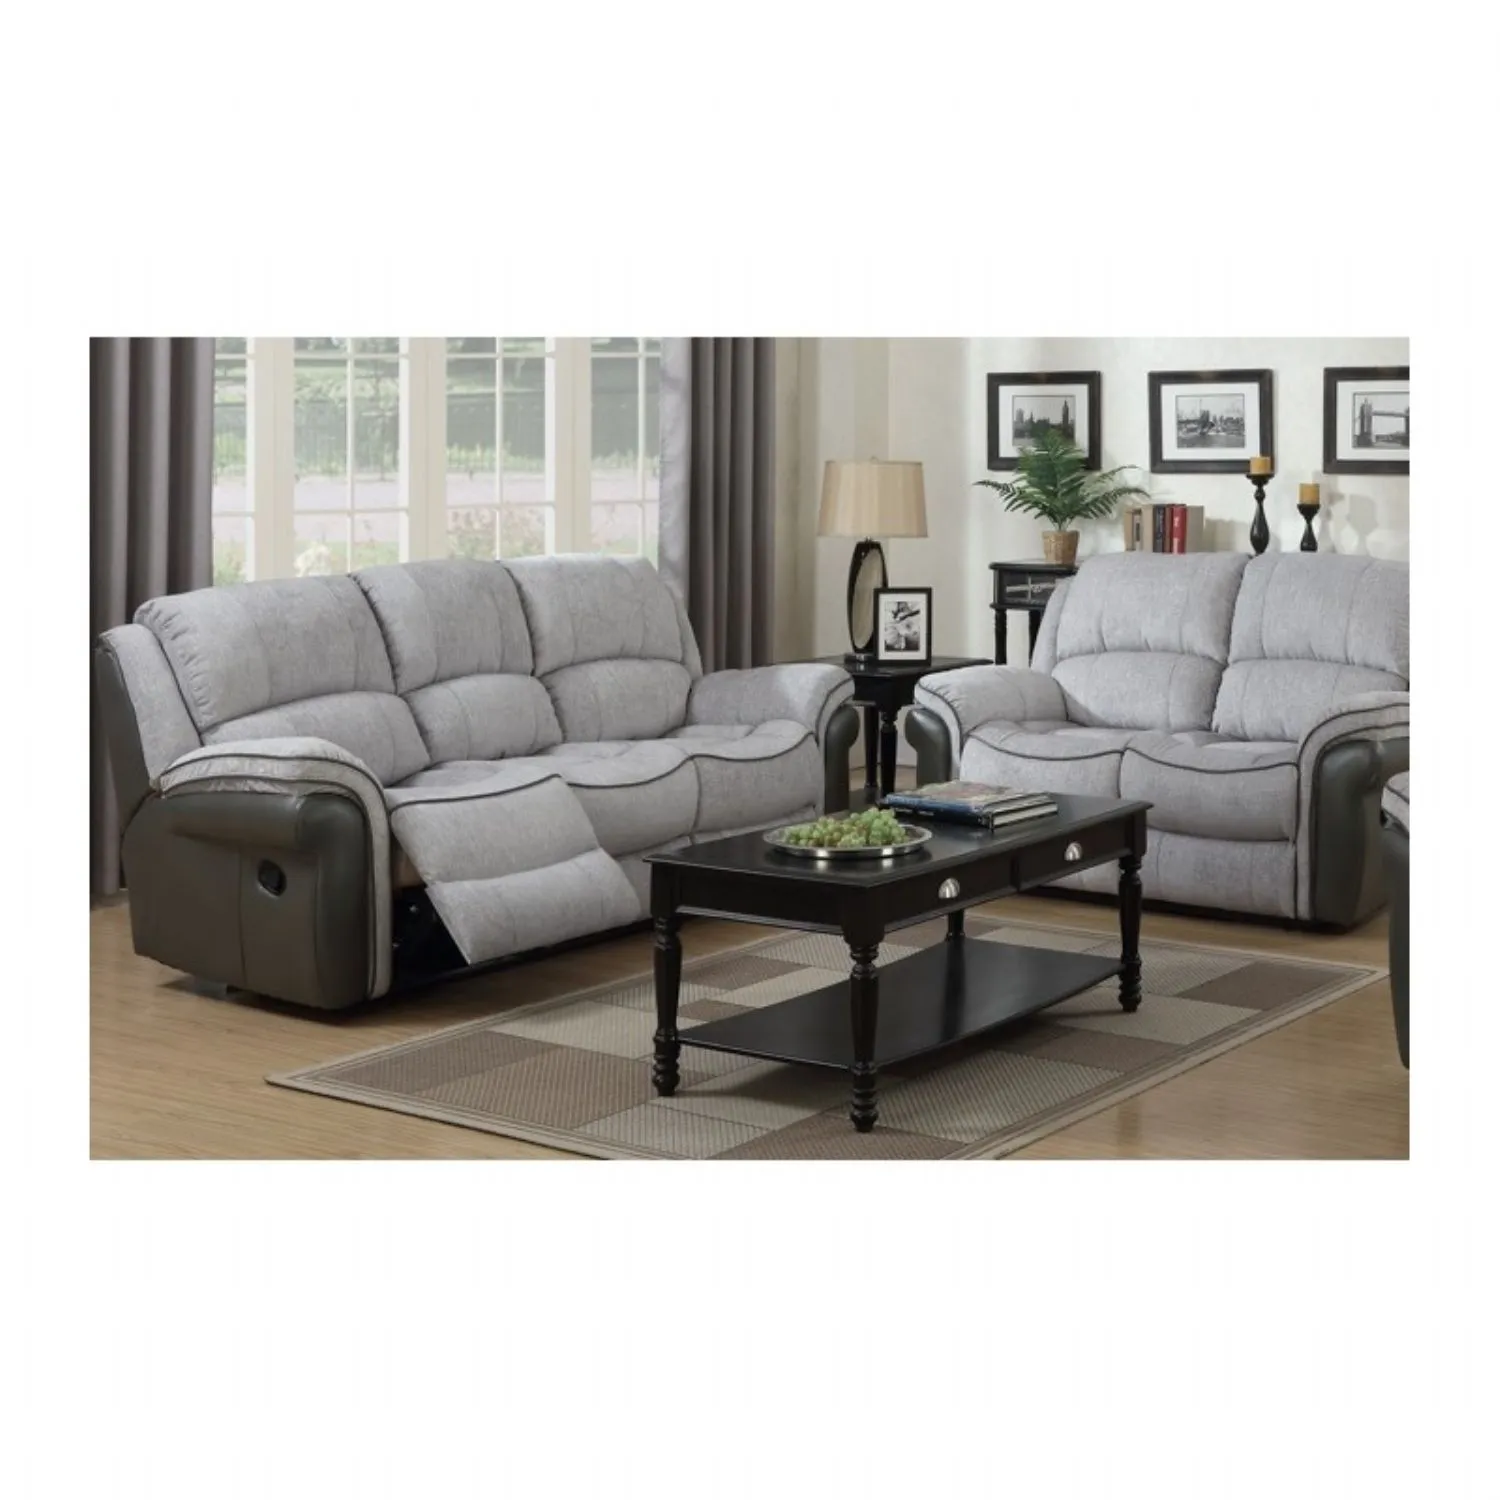 Grey Fabric and Leather Air 3 + 2 Manual Reclining Suite